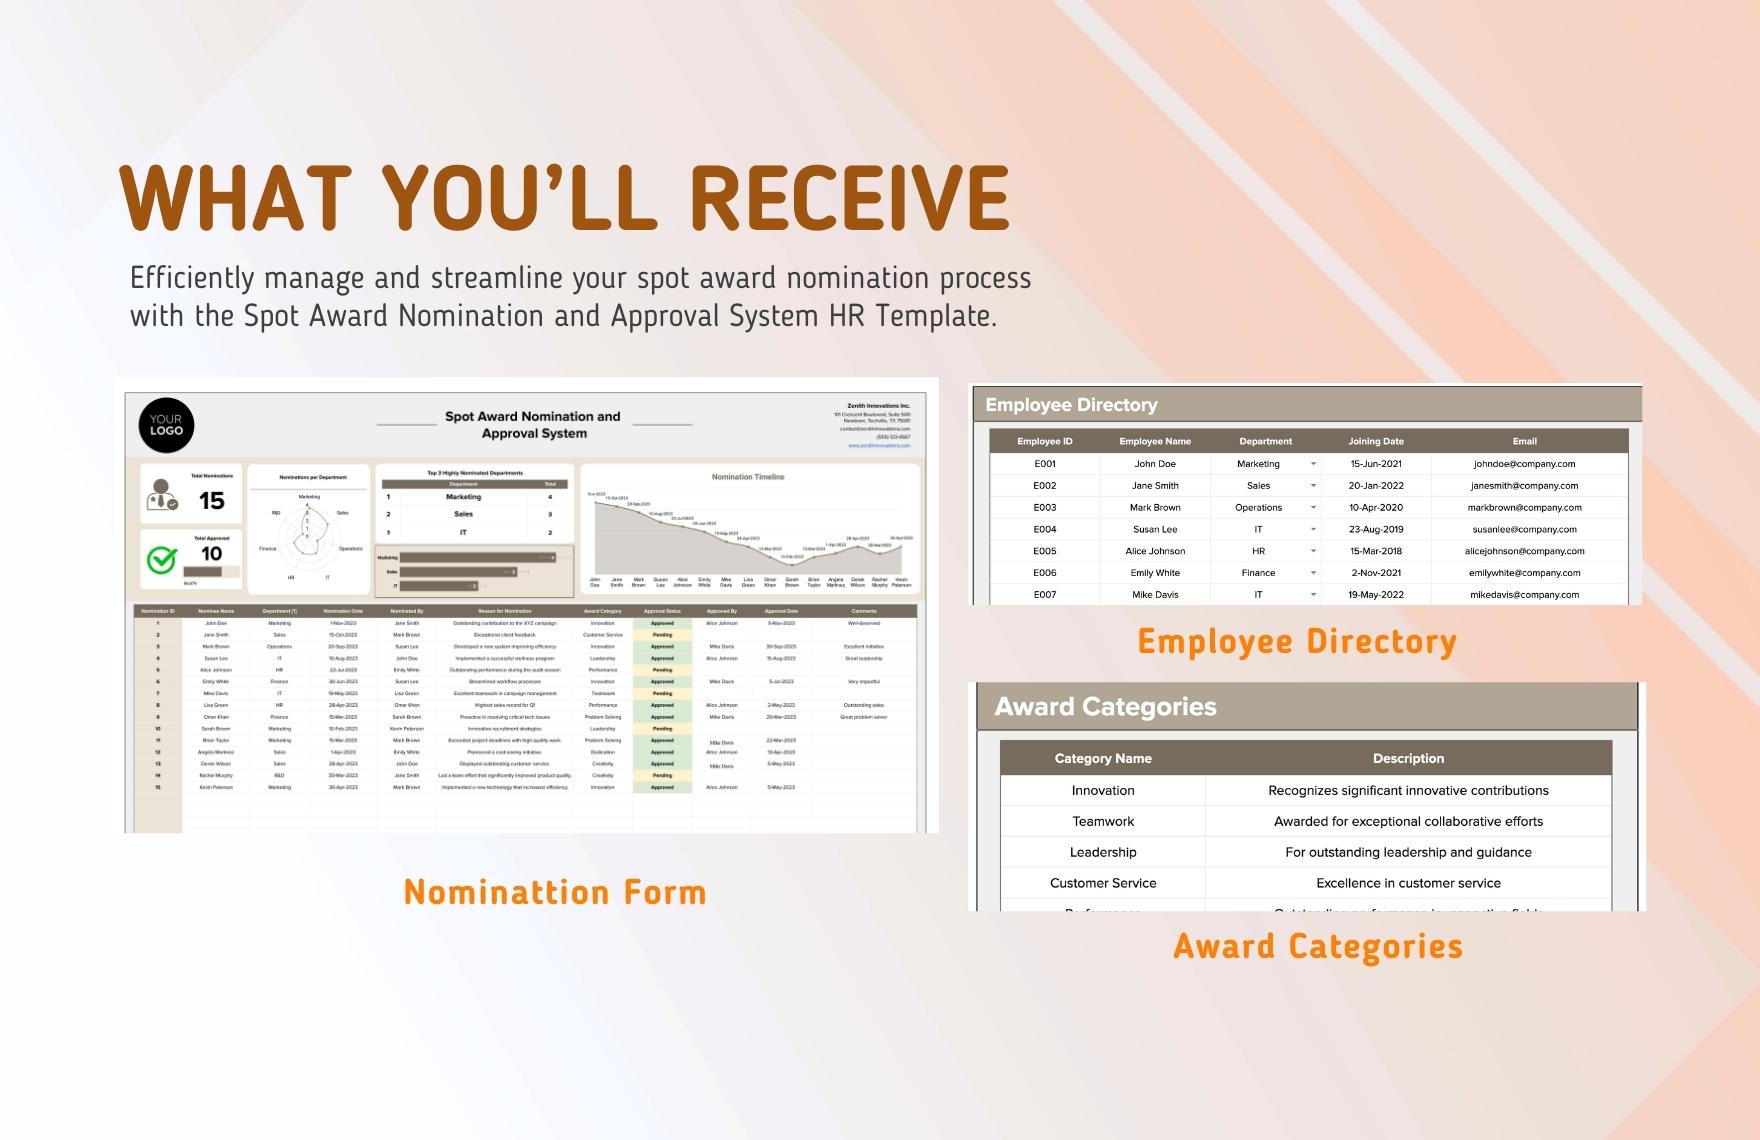 Spot Award Nomination and Approval System HR Template